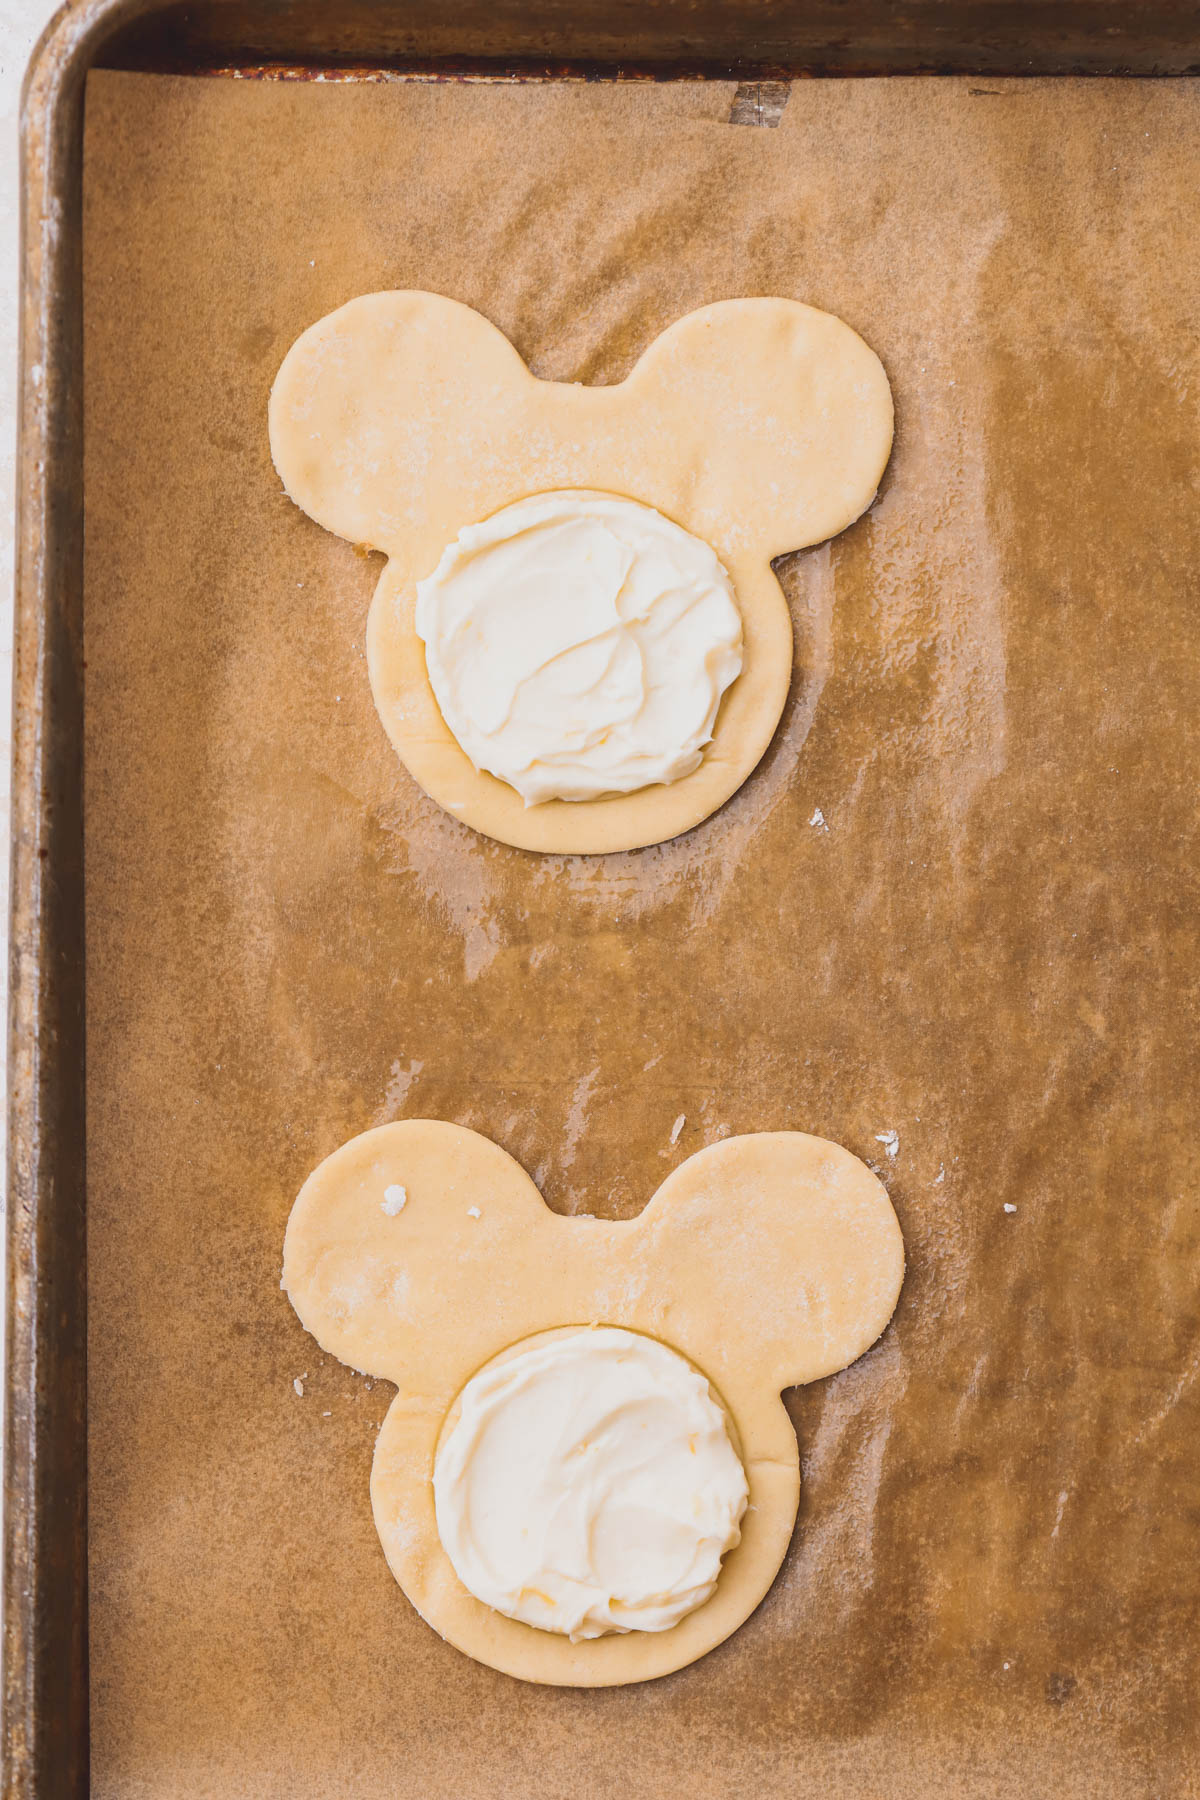 Mickey shaped puff pastry topped with lemon cream cheese.  